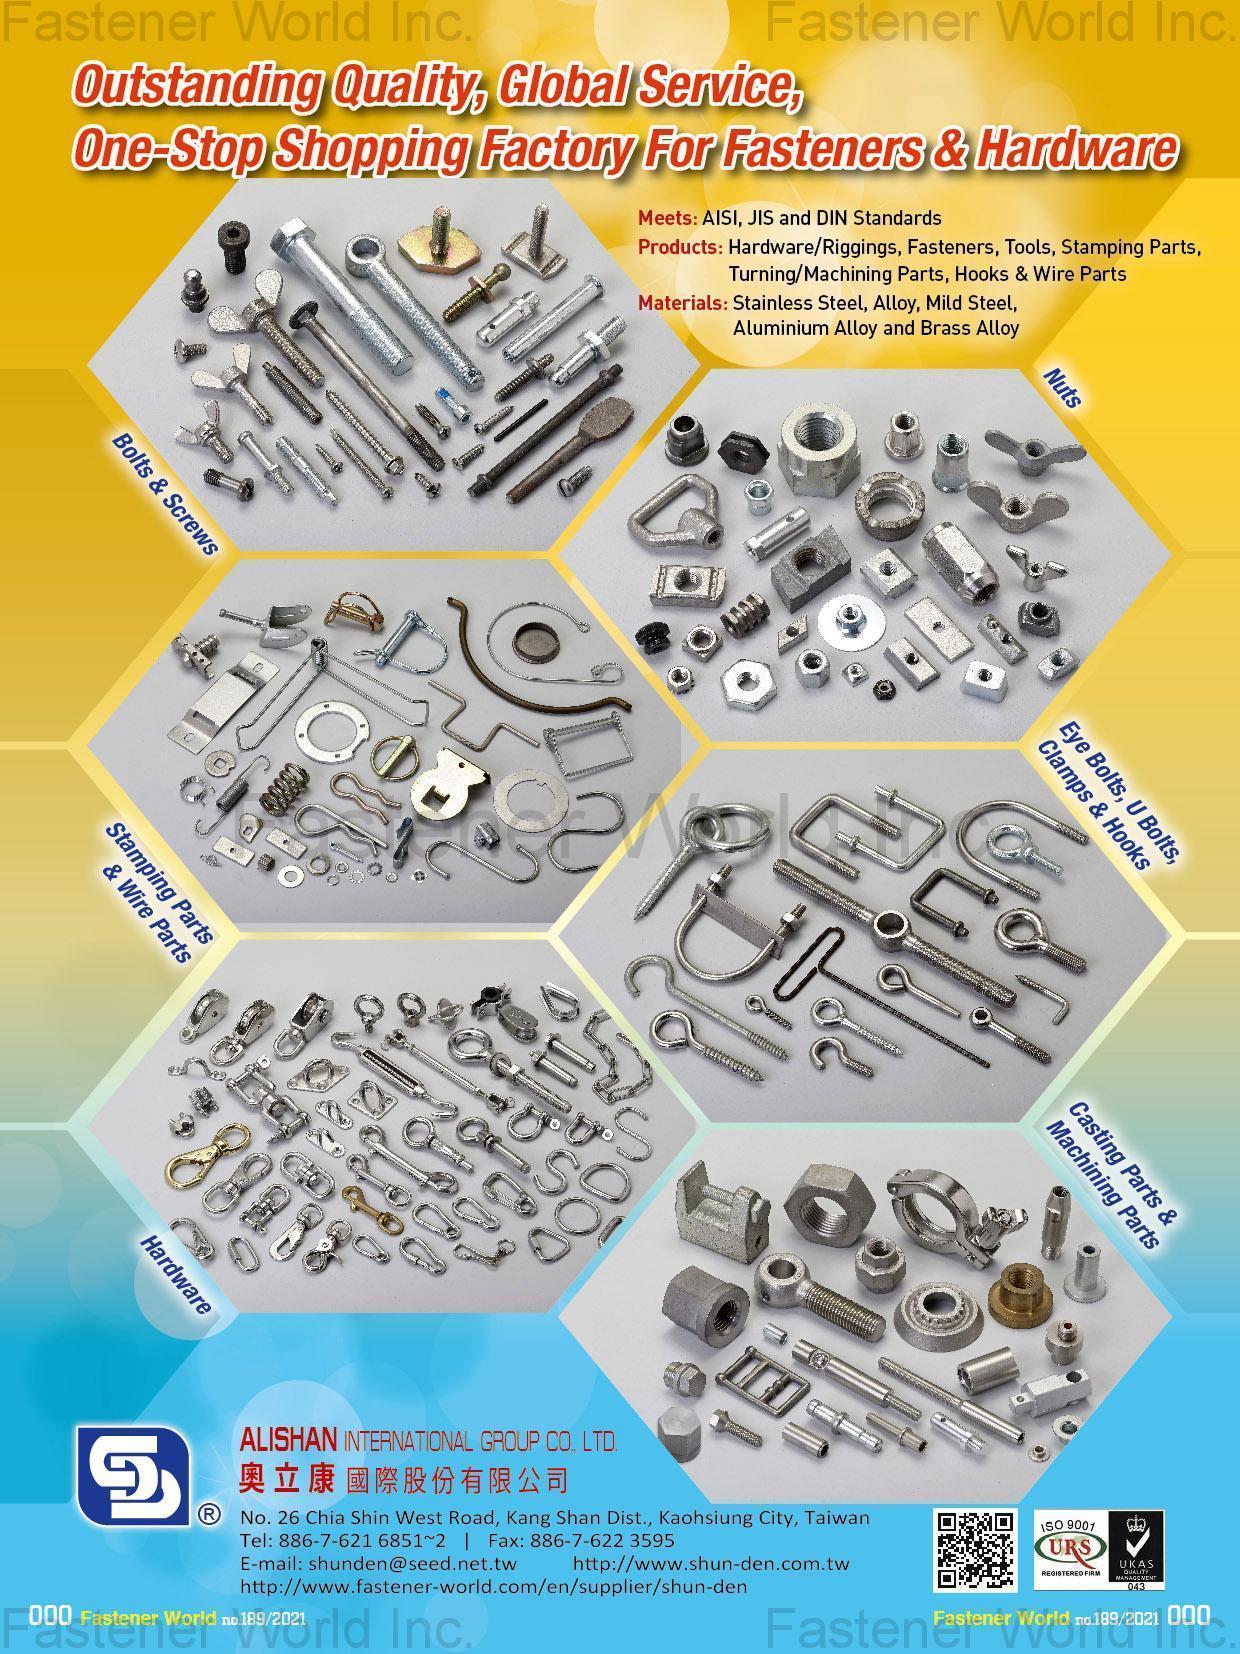 ALISHAN INTERNATIONAL GROUP CO., LTD. , Bolts & Screws, Stamping Parts & Wire Parts, Hardware, Nuts, Eye Bolts, U Bolts, Clamps & Hooks, Casting Parts & Machining Parts